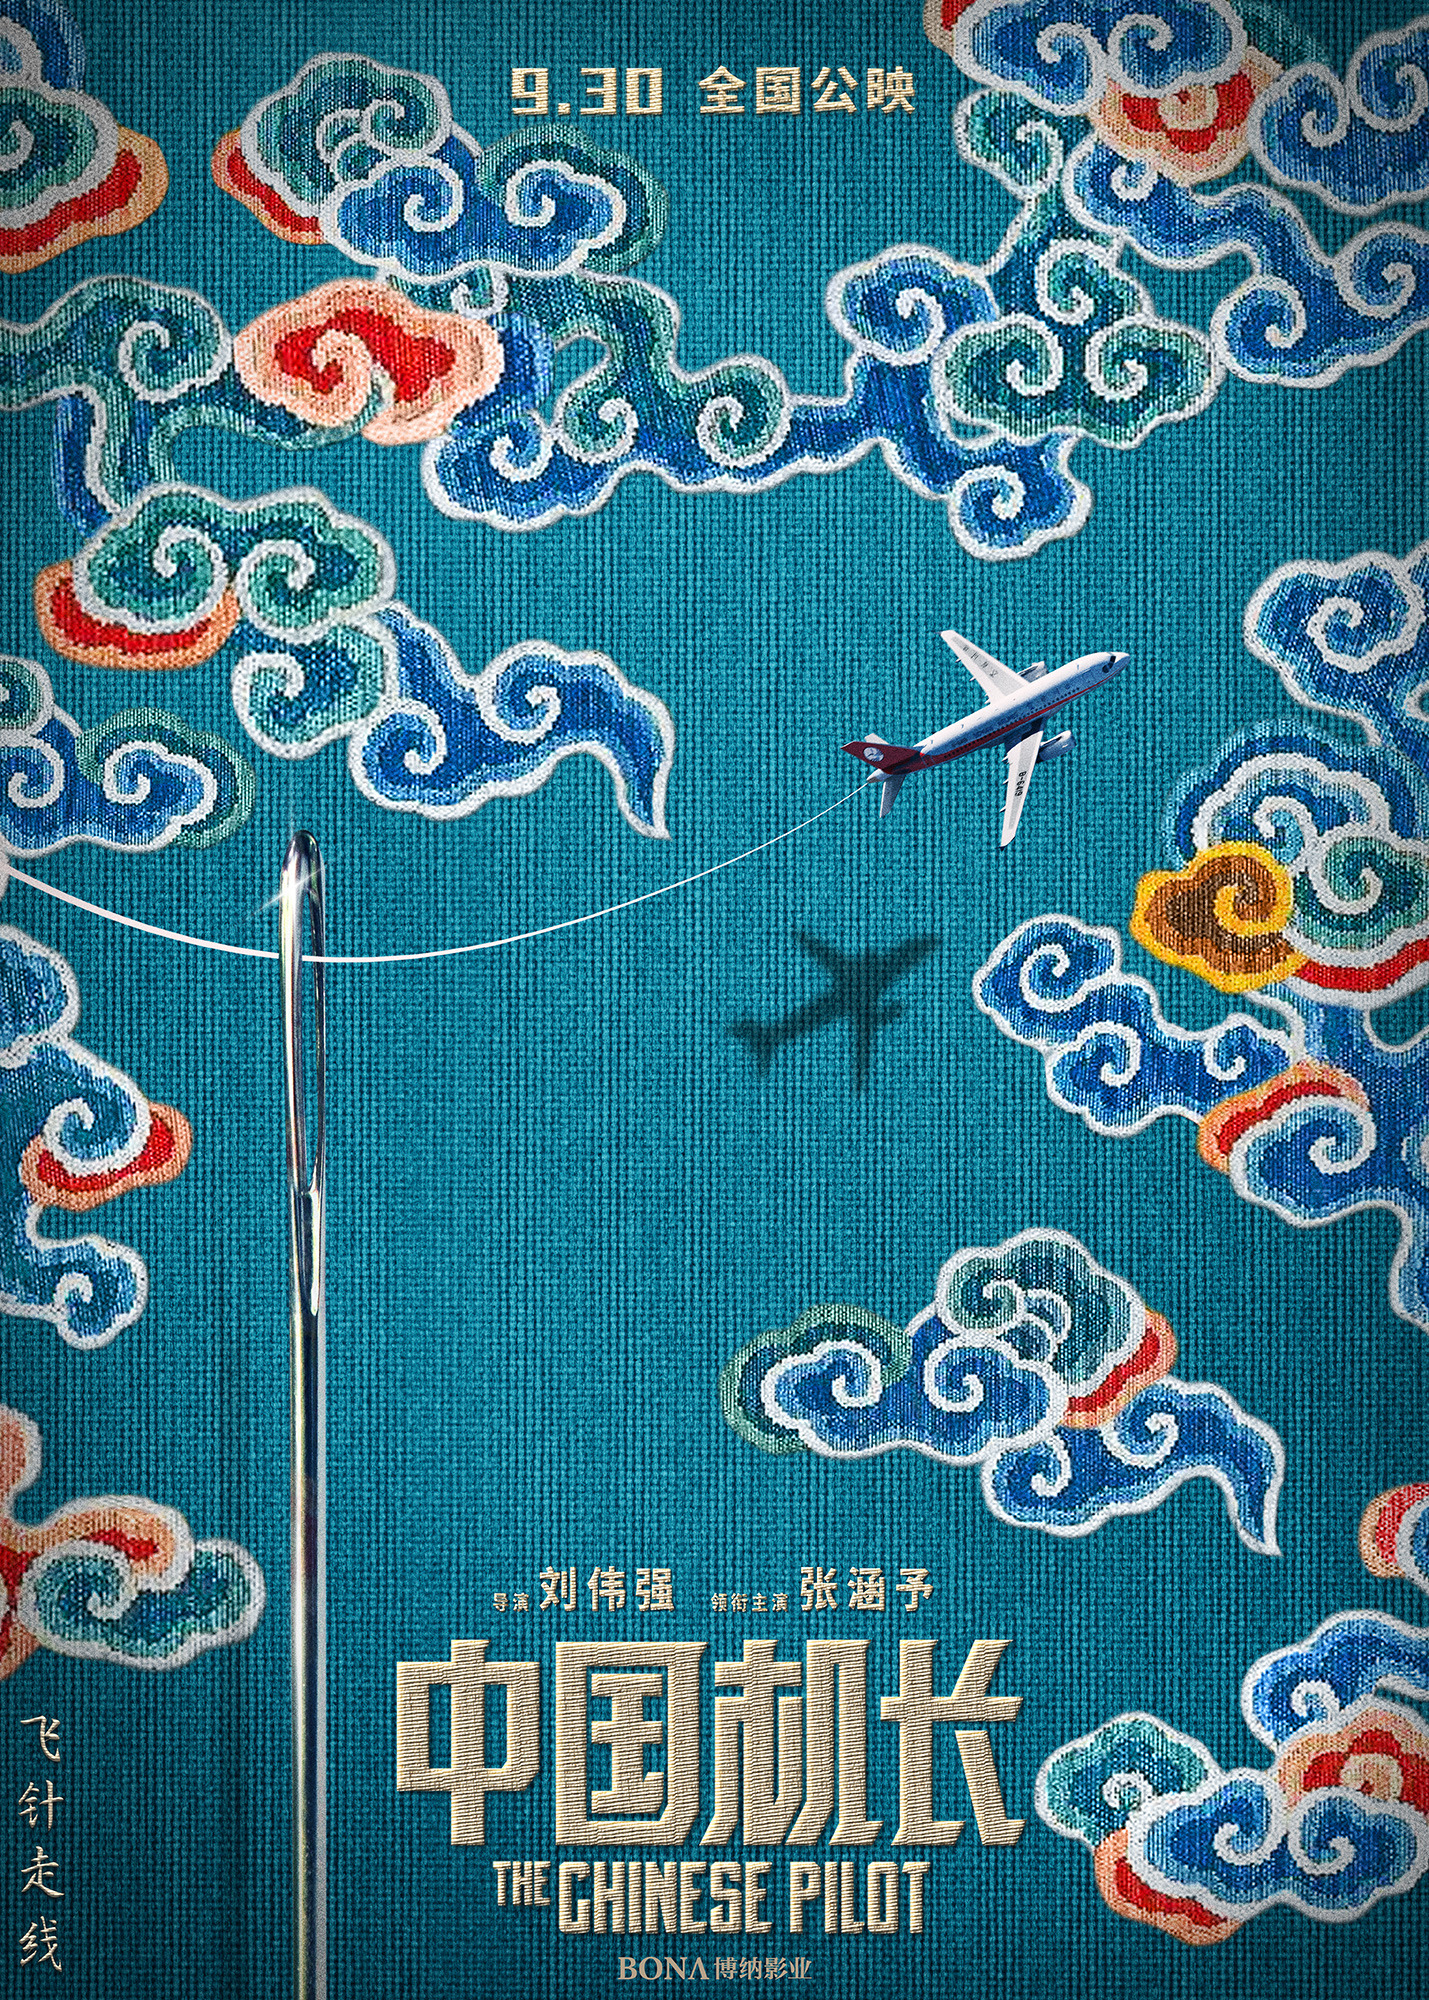 Mega Sized Movie Poster Image for The Chinese Pilot (#12 of 17)